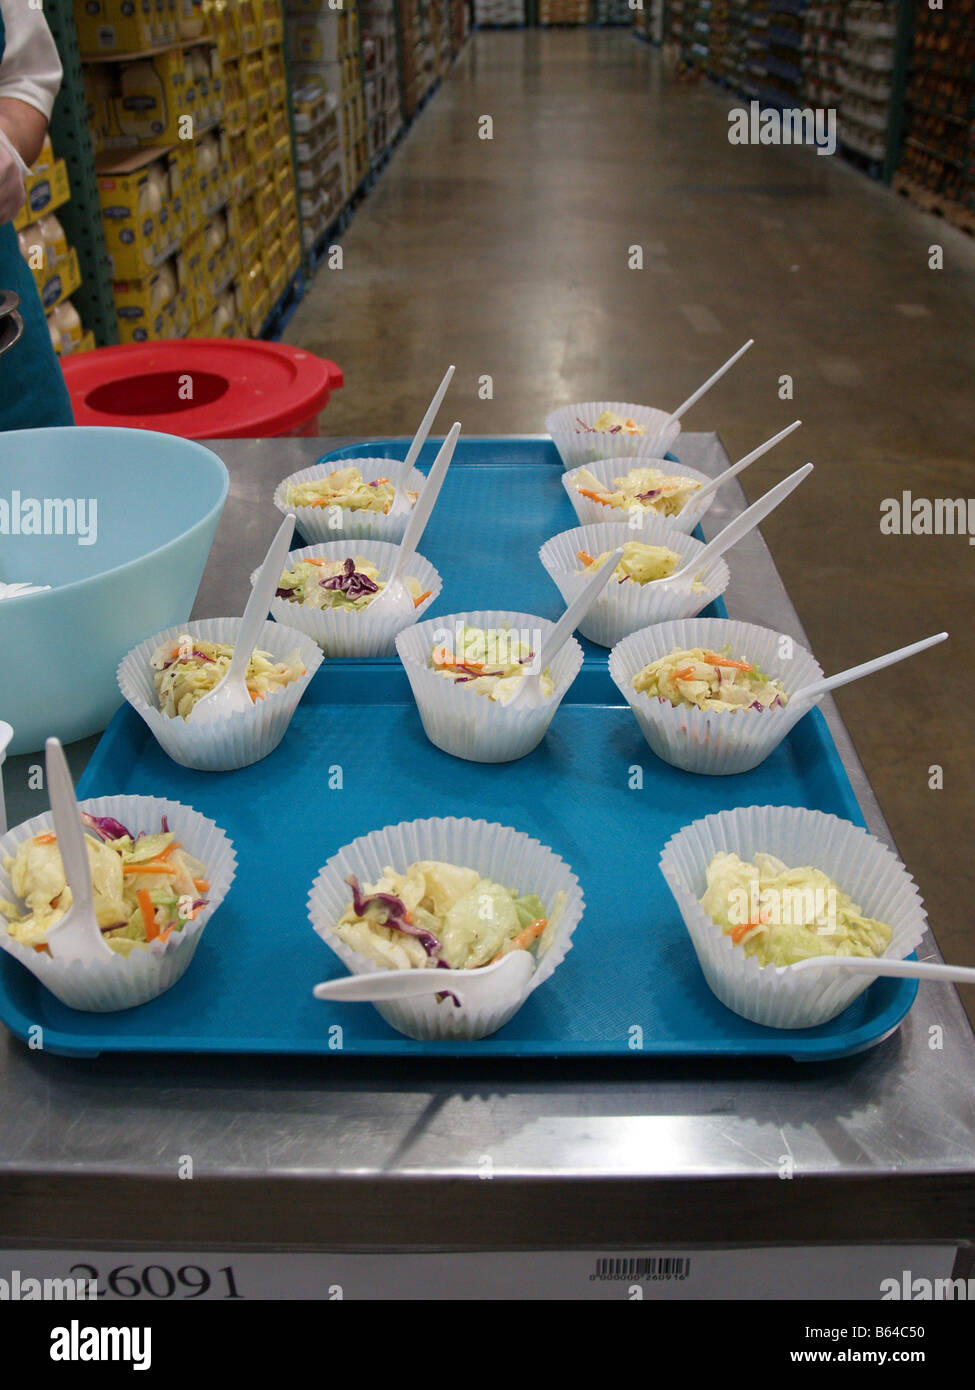 Food samples offered in a Costco Wholesale big box store in the United States Stock Photo